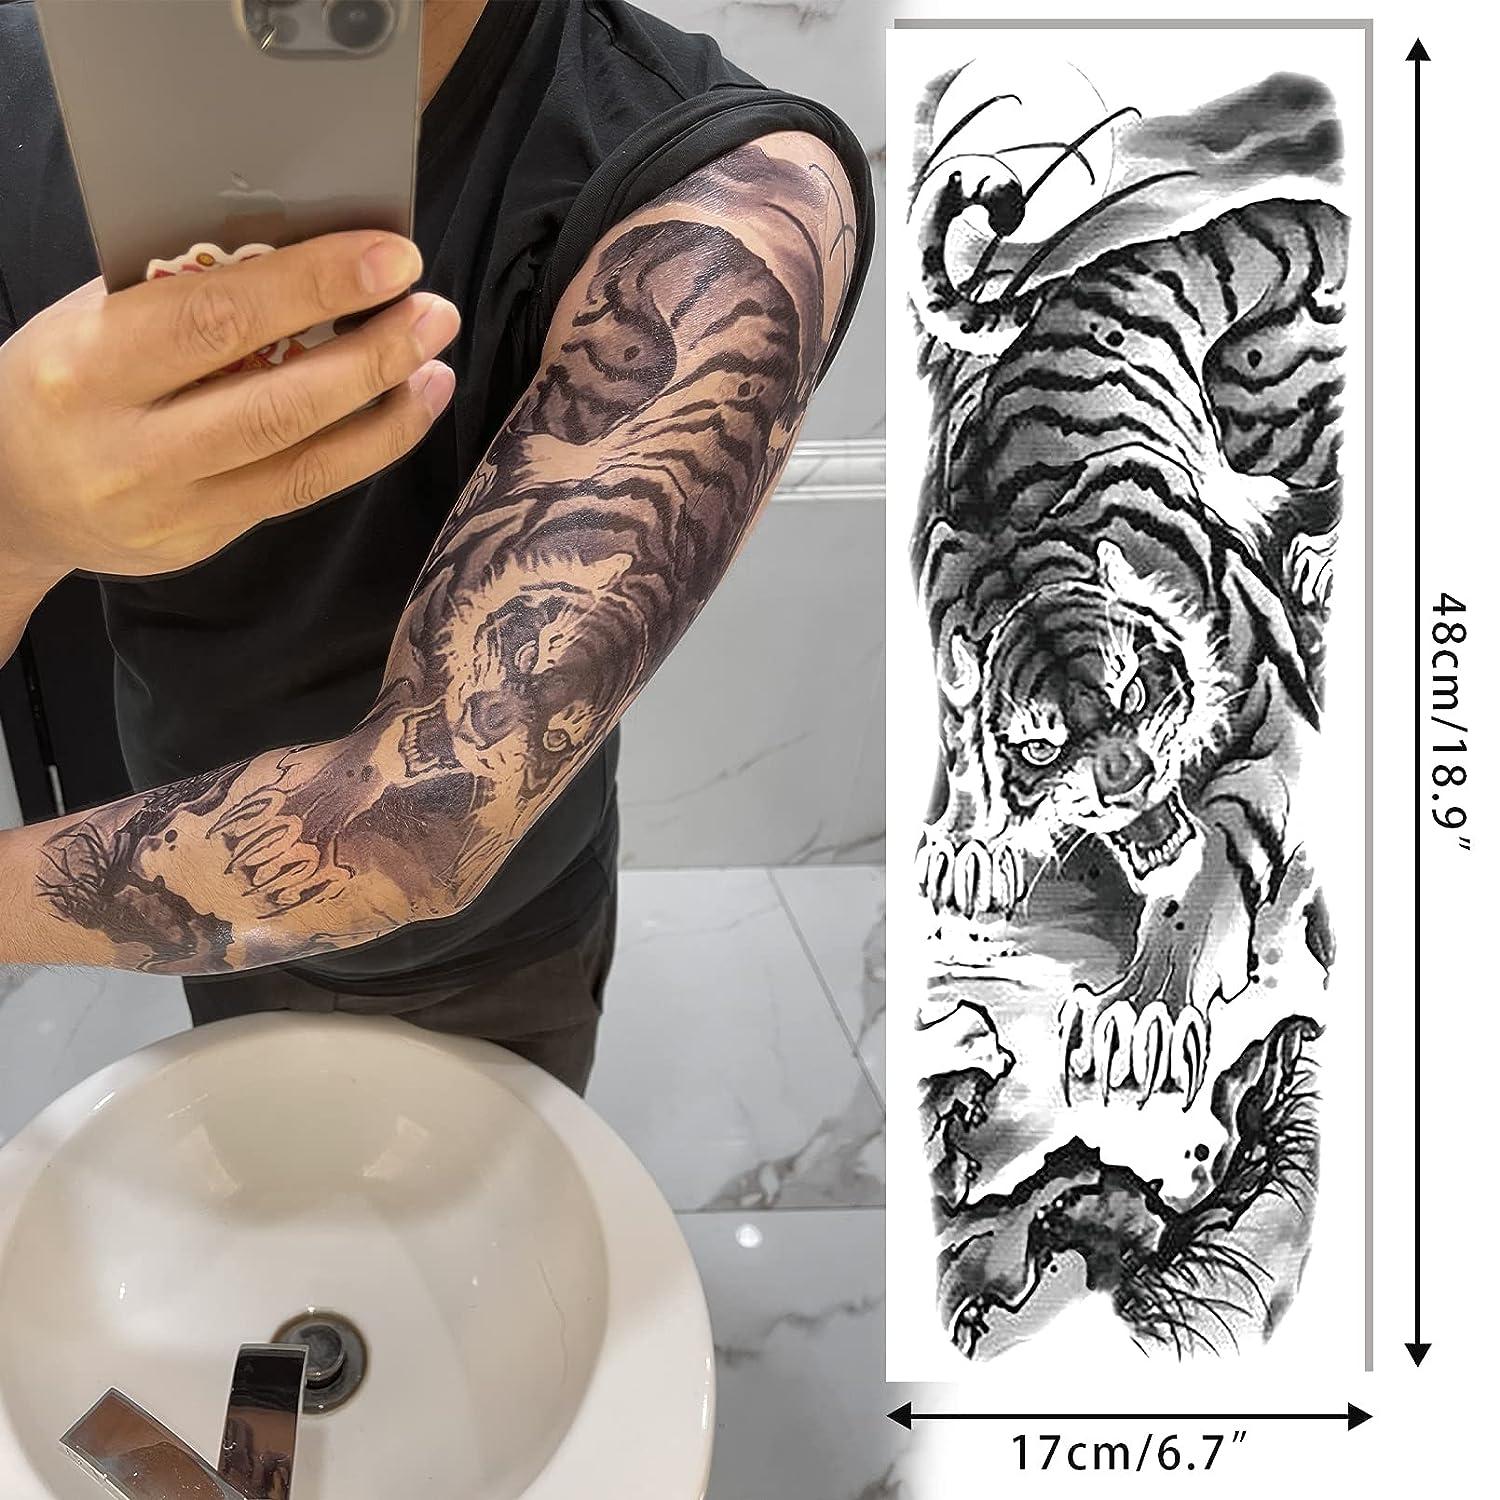 Tiger Tattoo at Rs 600/square inch in Bengaluru | ID: 23891885230